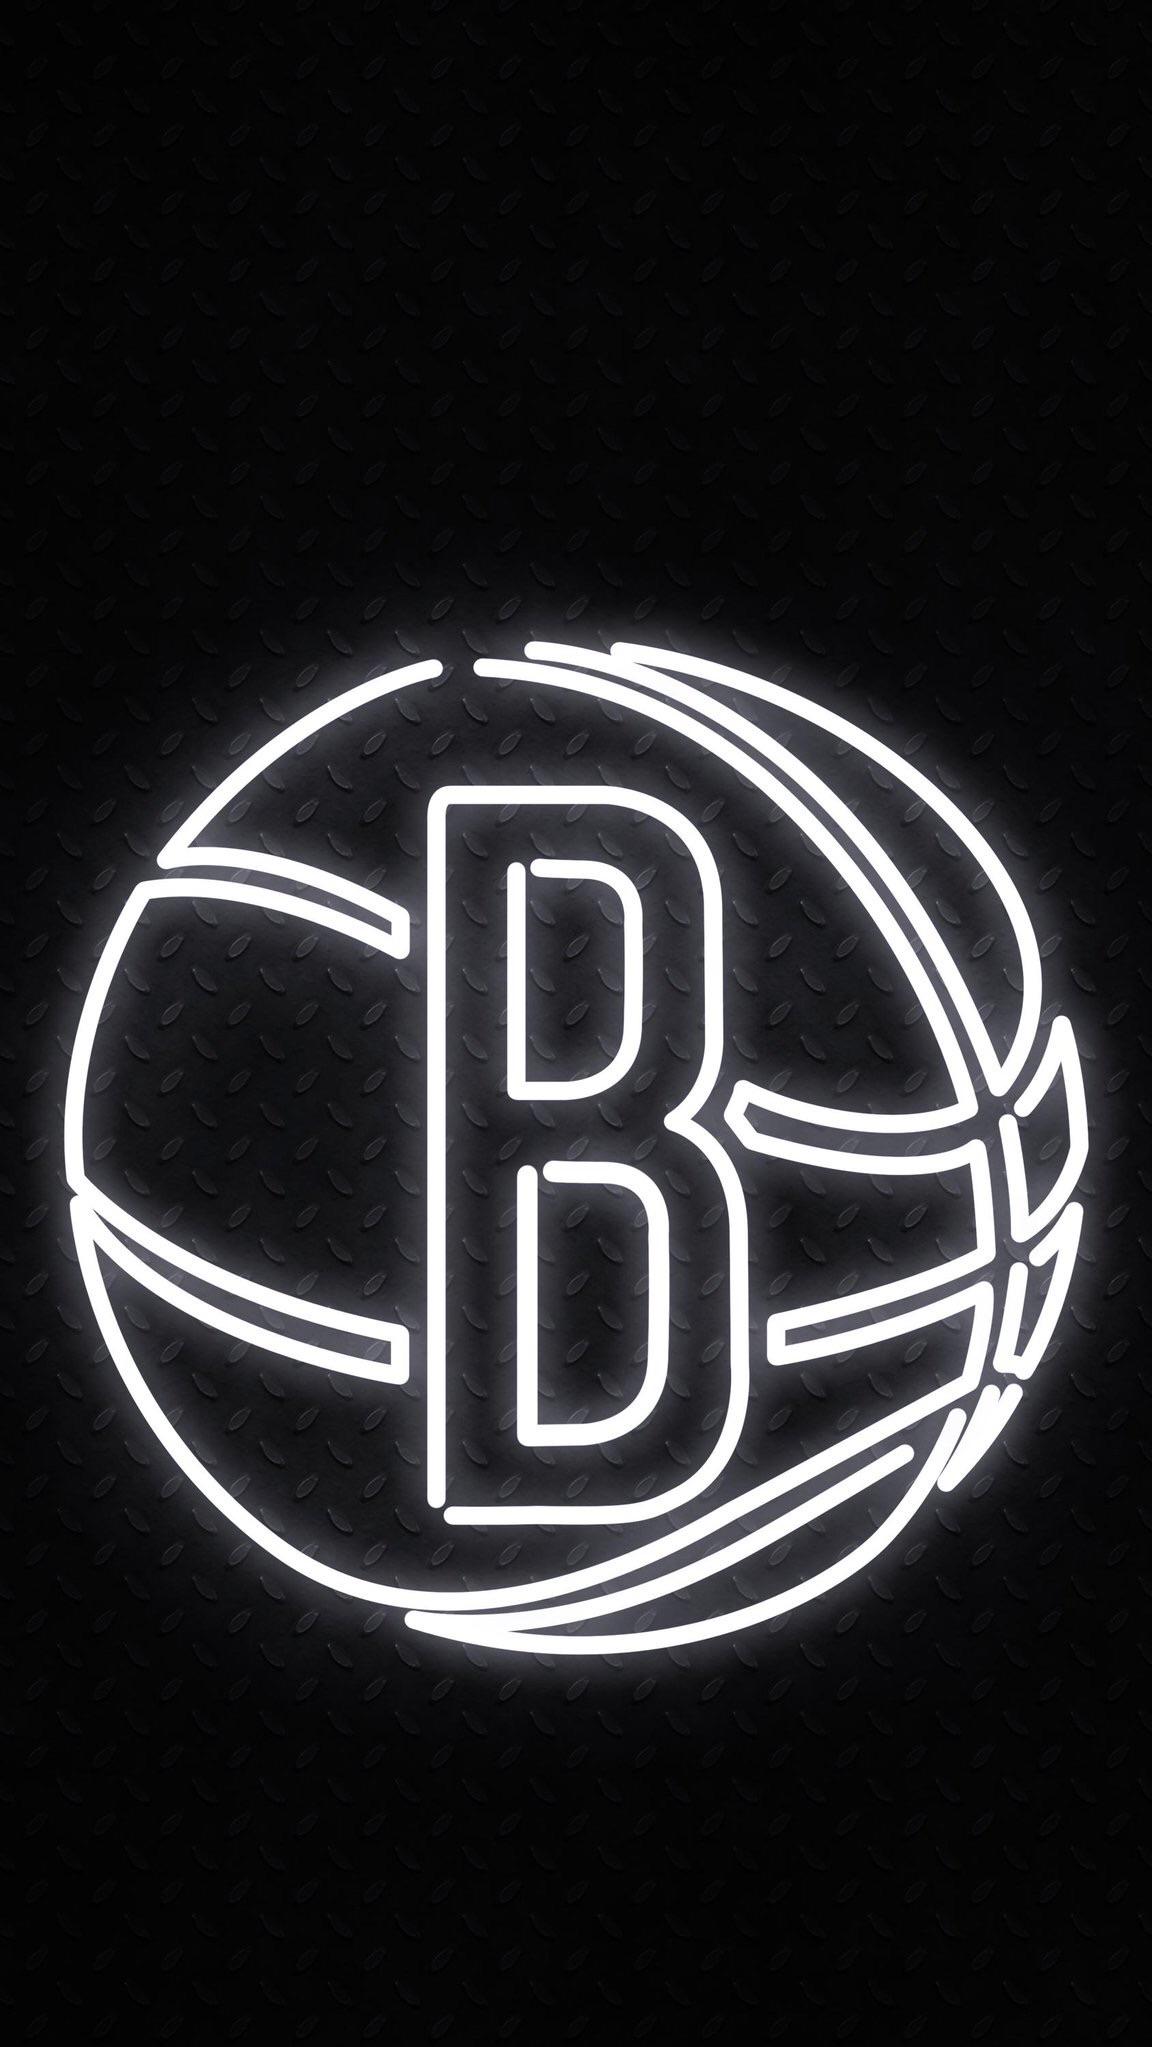 This awesome neon wallpaper of the Nets Logo by trxnton on